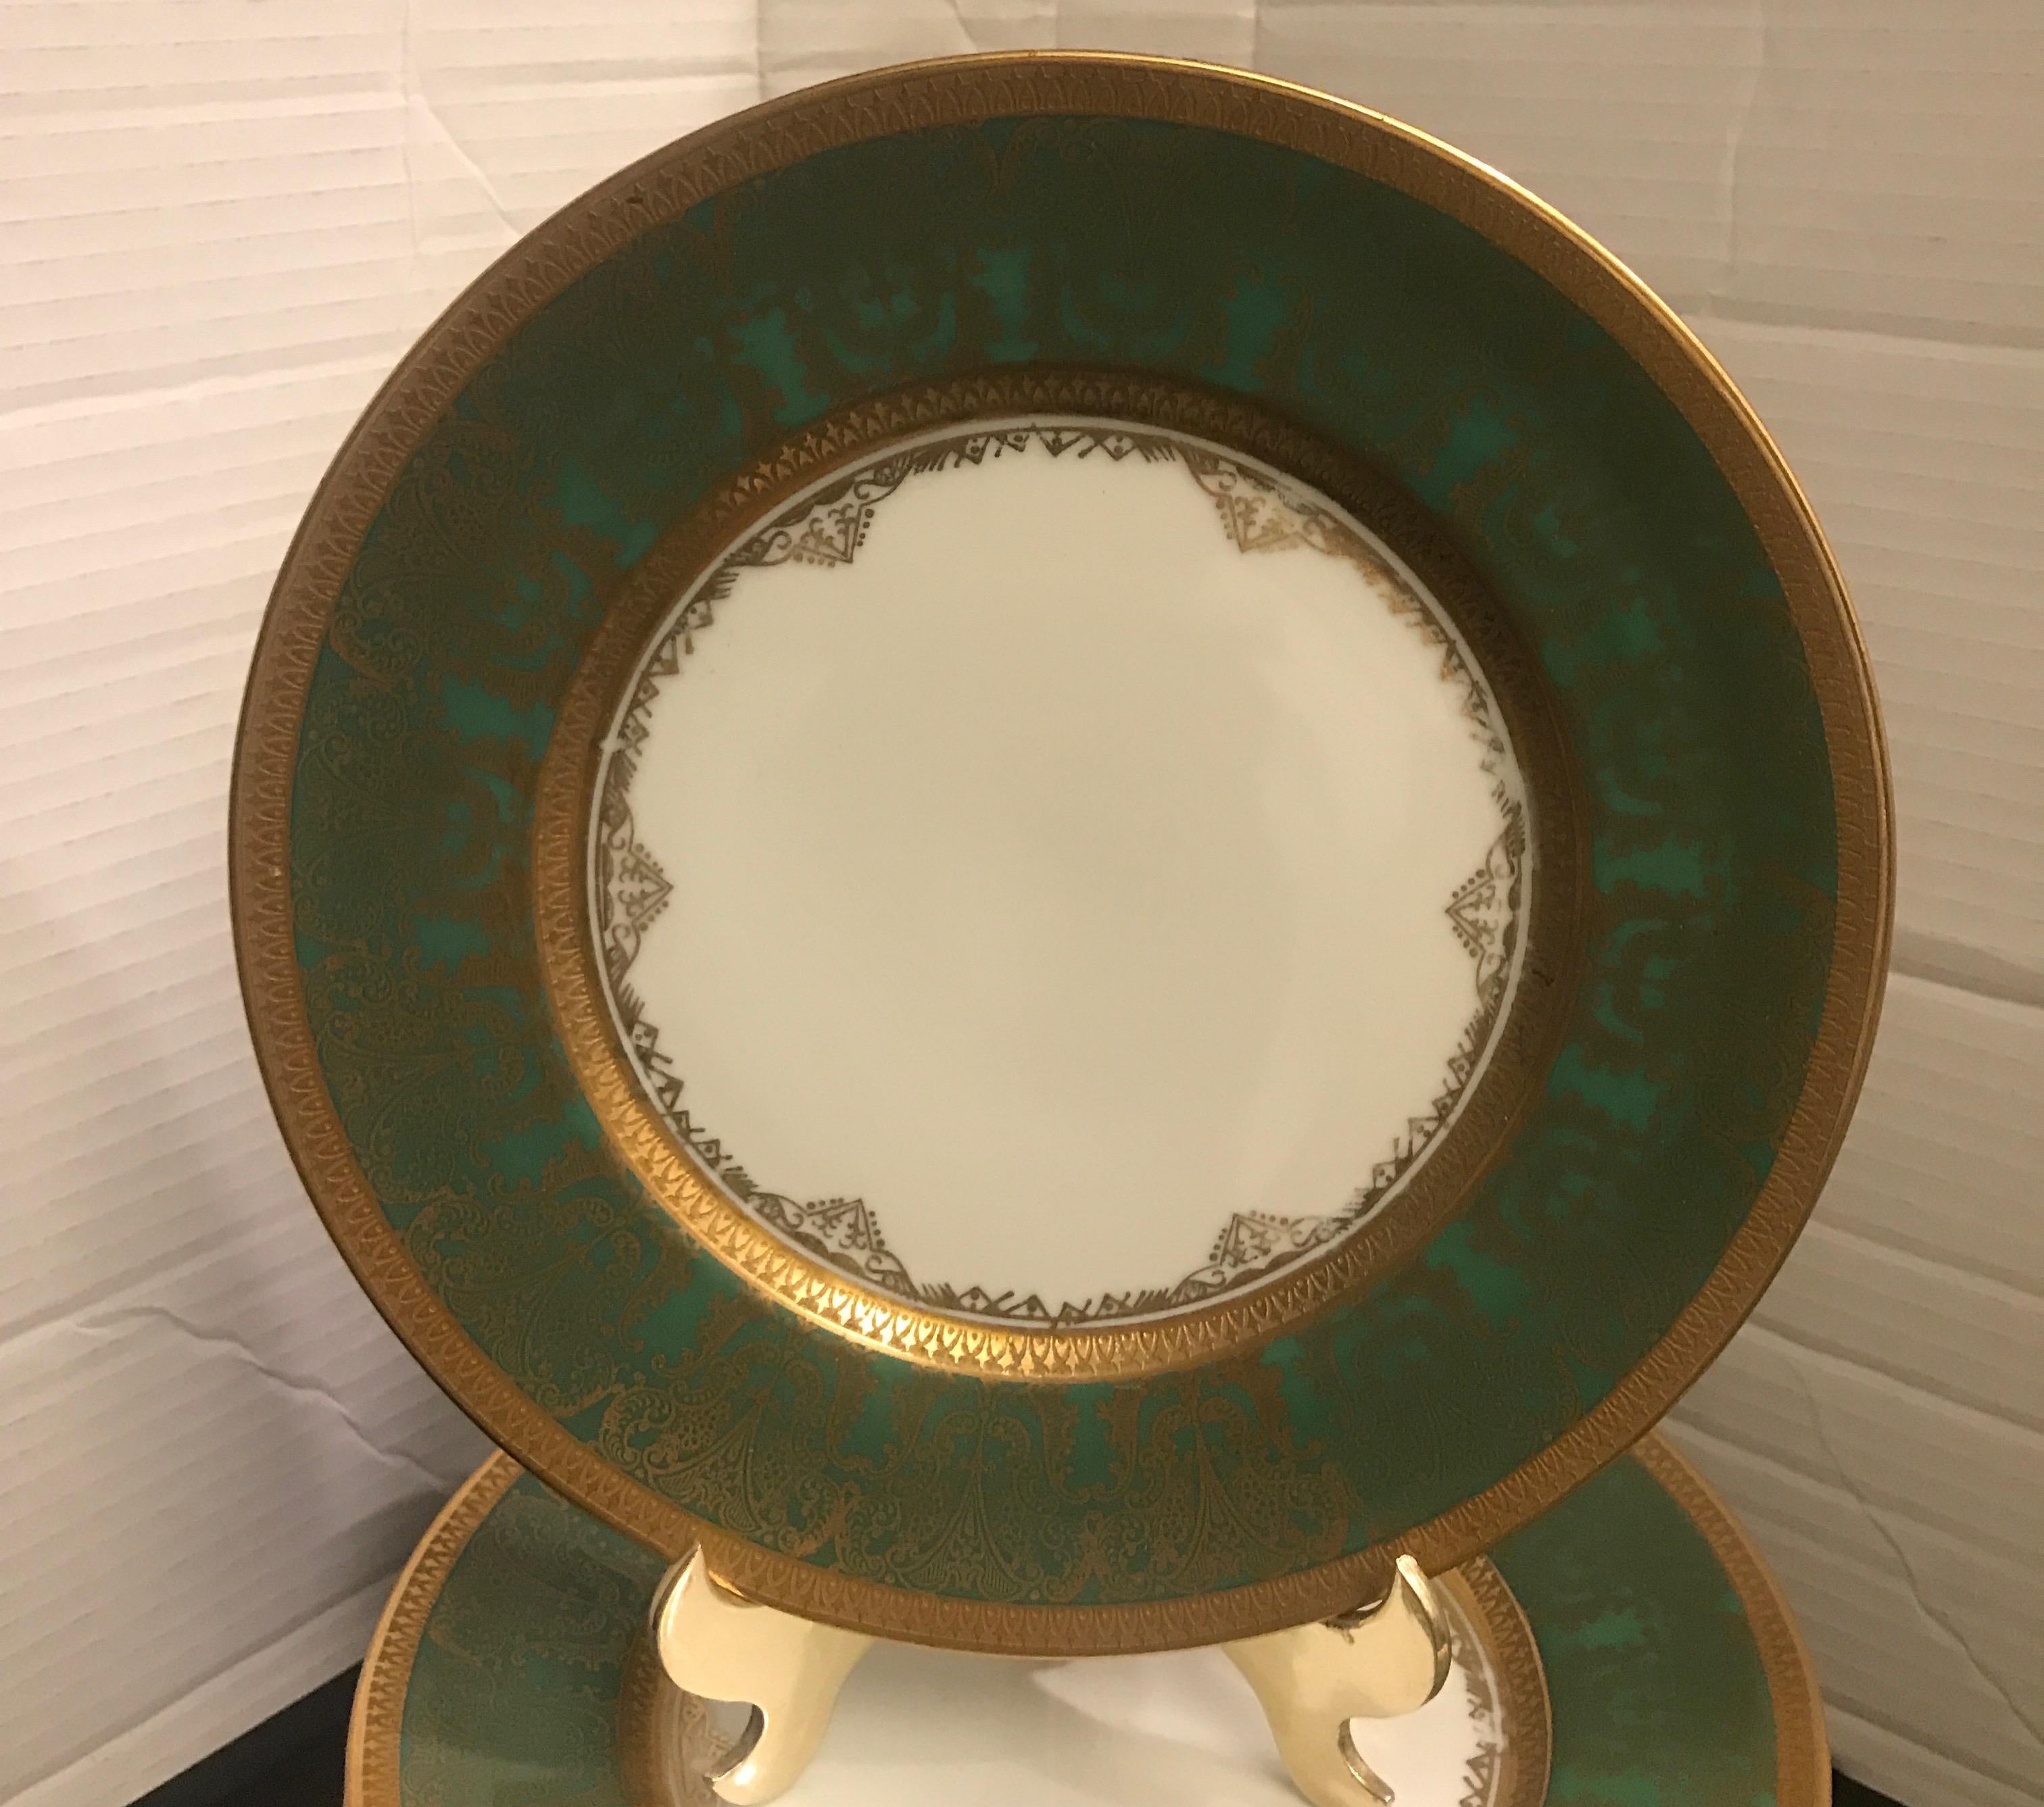 A set of 10 rich green and gold encrusted accent plates by Sommer & Matschak. The plates are 8.75 inches in diameter and are stunning when used on with other plates with a rich gold border, Circa 1905-1910.